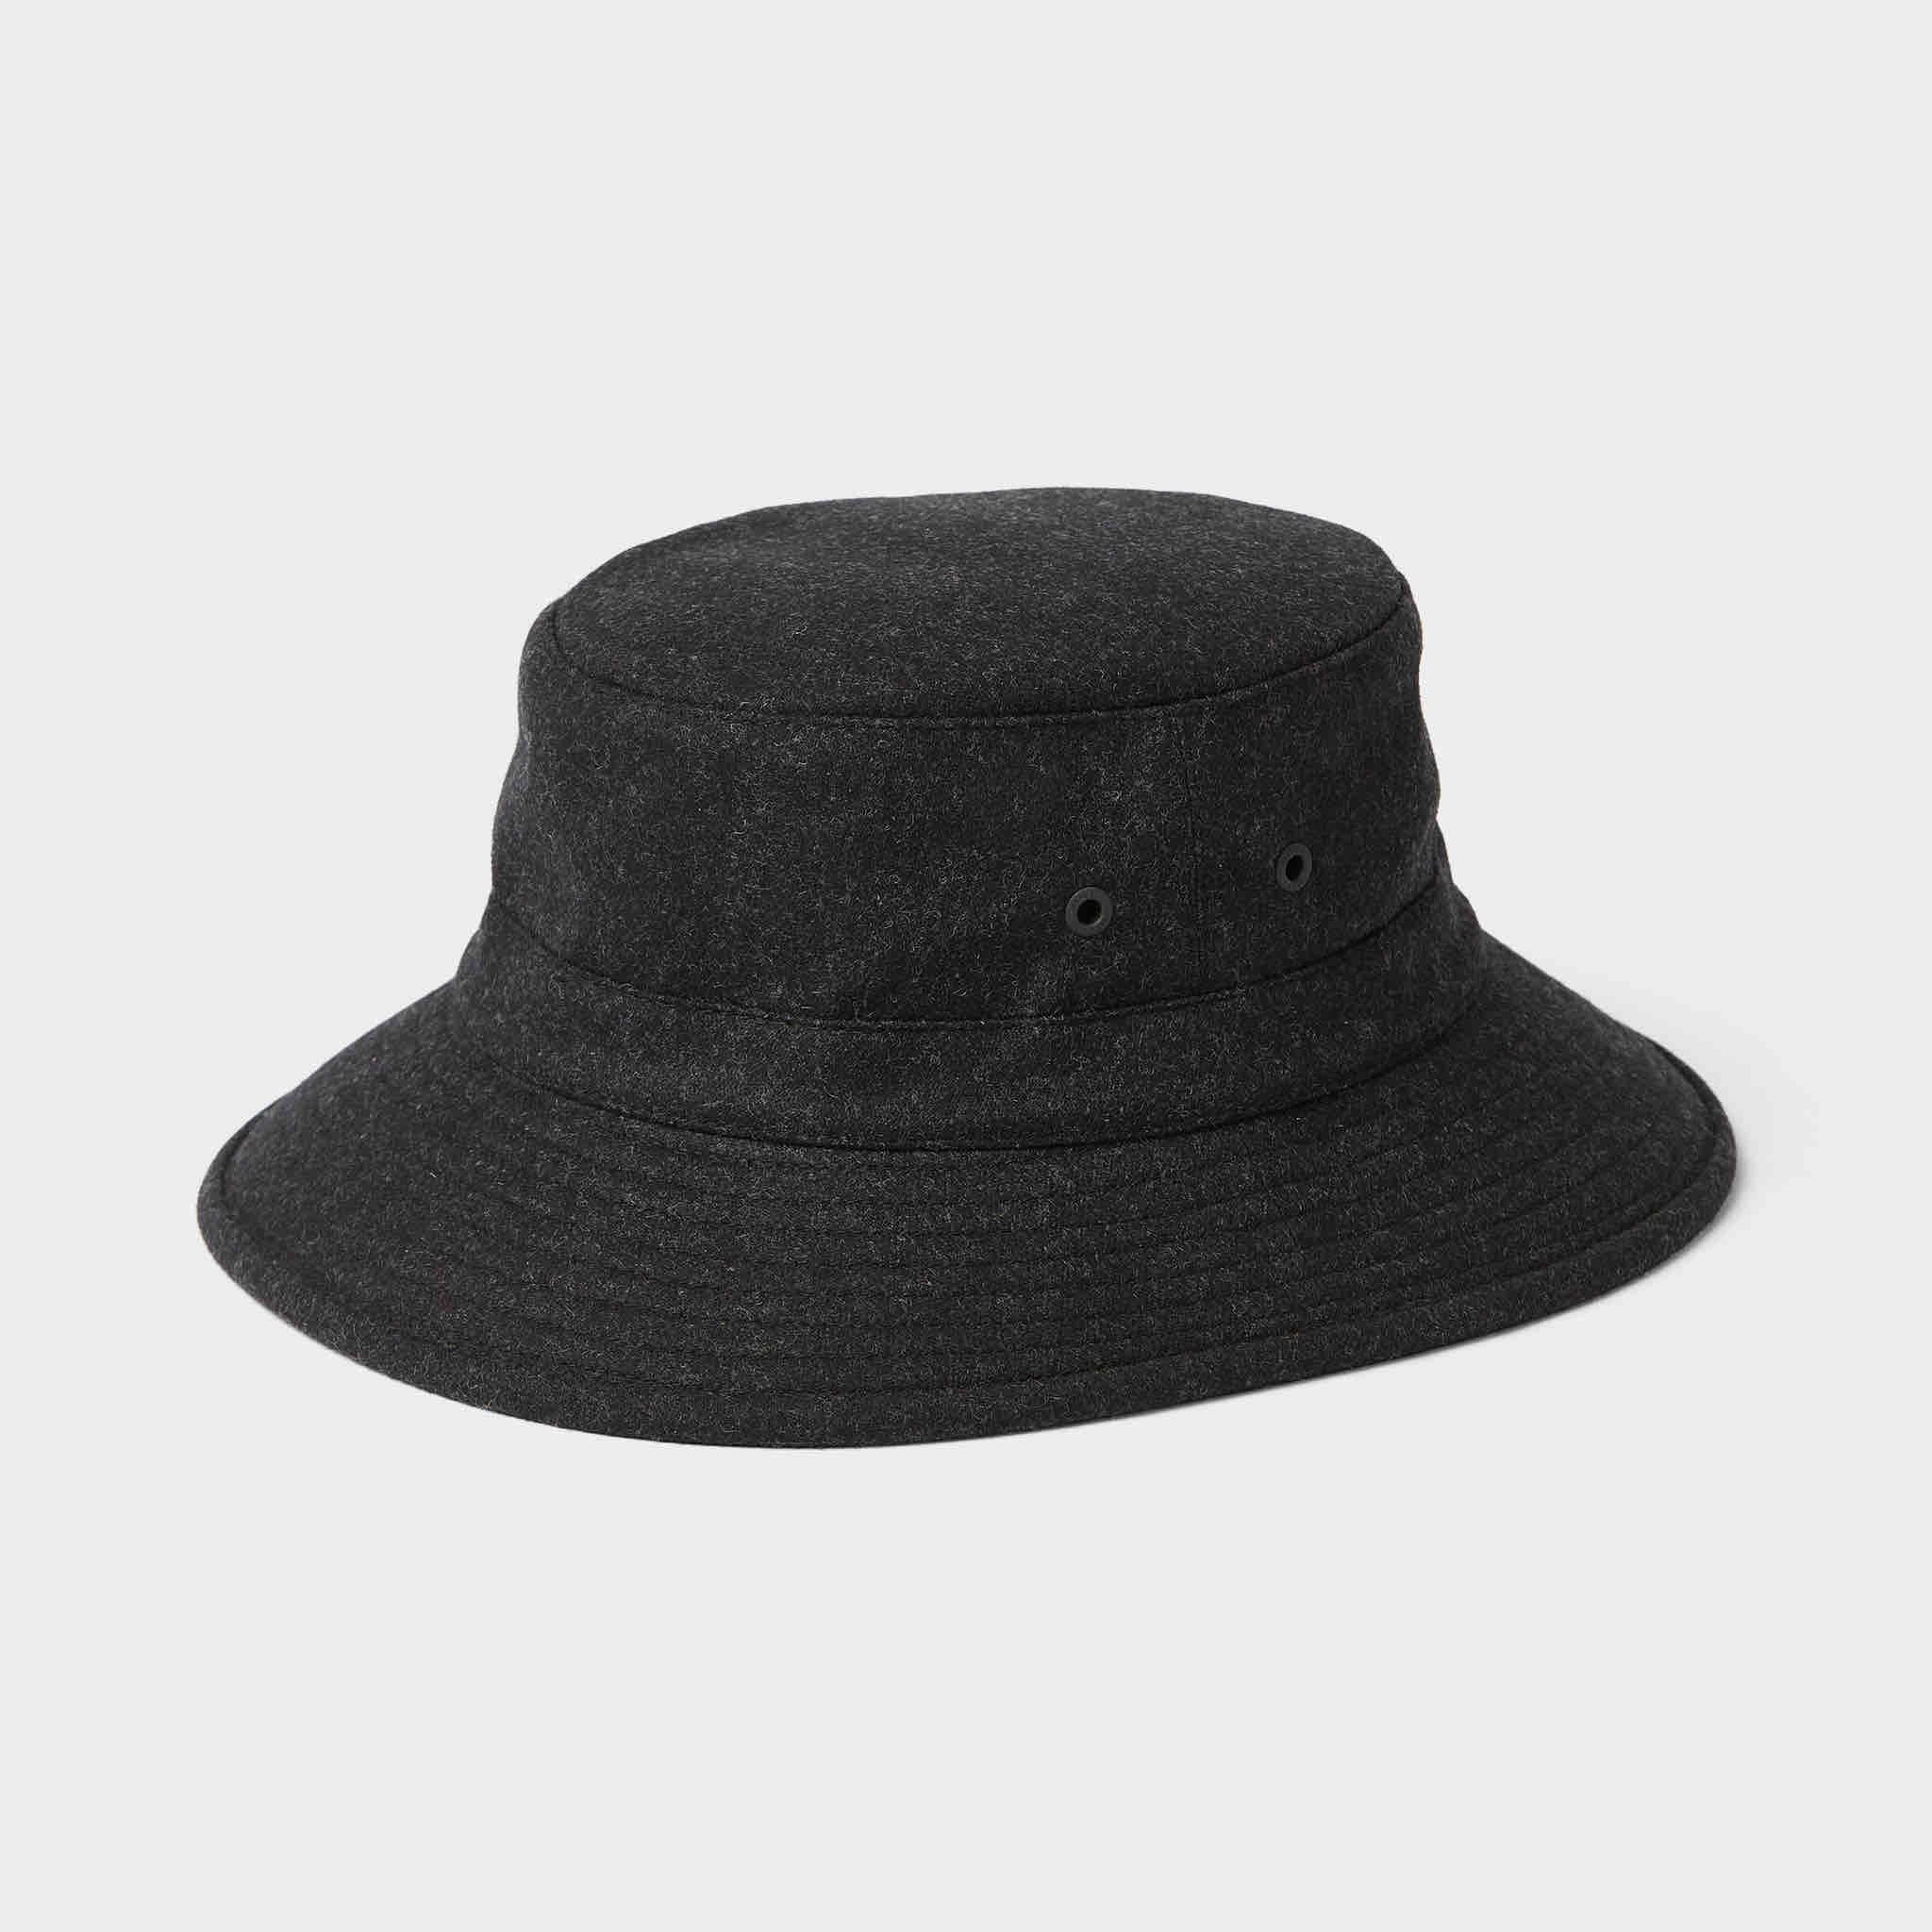 Warmth TILLEY Winter Bucket Hat, Fast Shipping